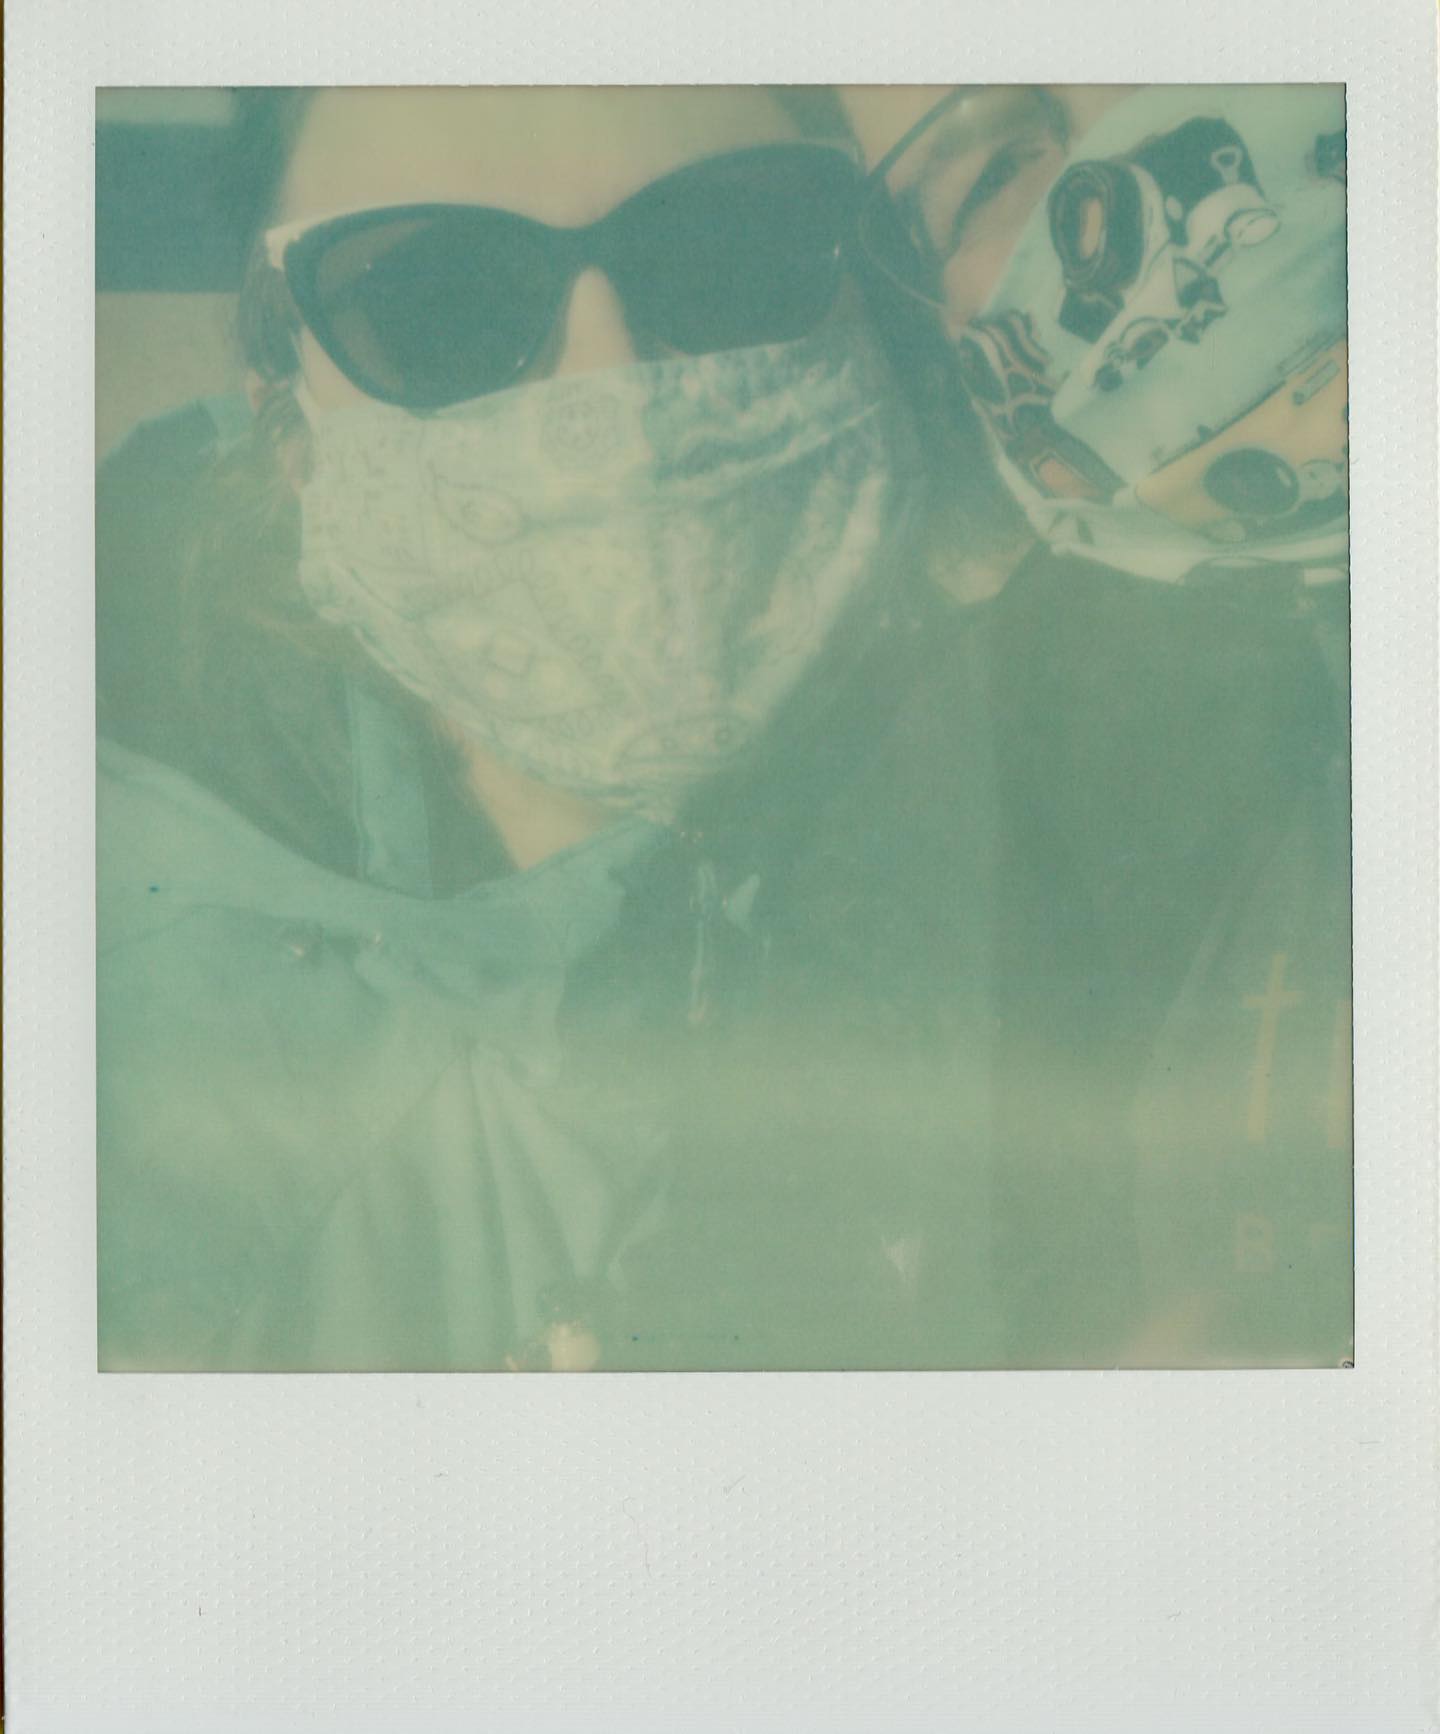 Love in the Time of Cholera / COVID-19

My wife and I on the beach, properly attired. This beach is still open, but Iâm not going to say where, because I wouldnât want it to be overrun. ð

#polaroidweek #polaroidweek2020 #roidweek #roidweek2020 #polaroid #mintcamera #impossibleproject #impossibleprojectbeta600film #expiredfilm